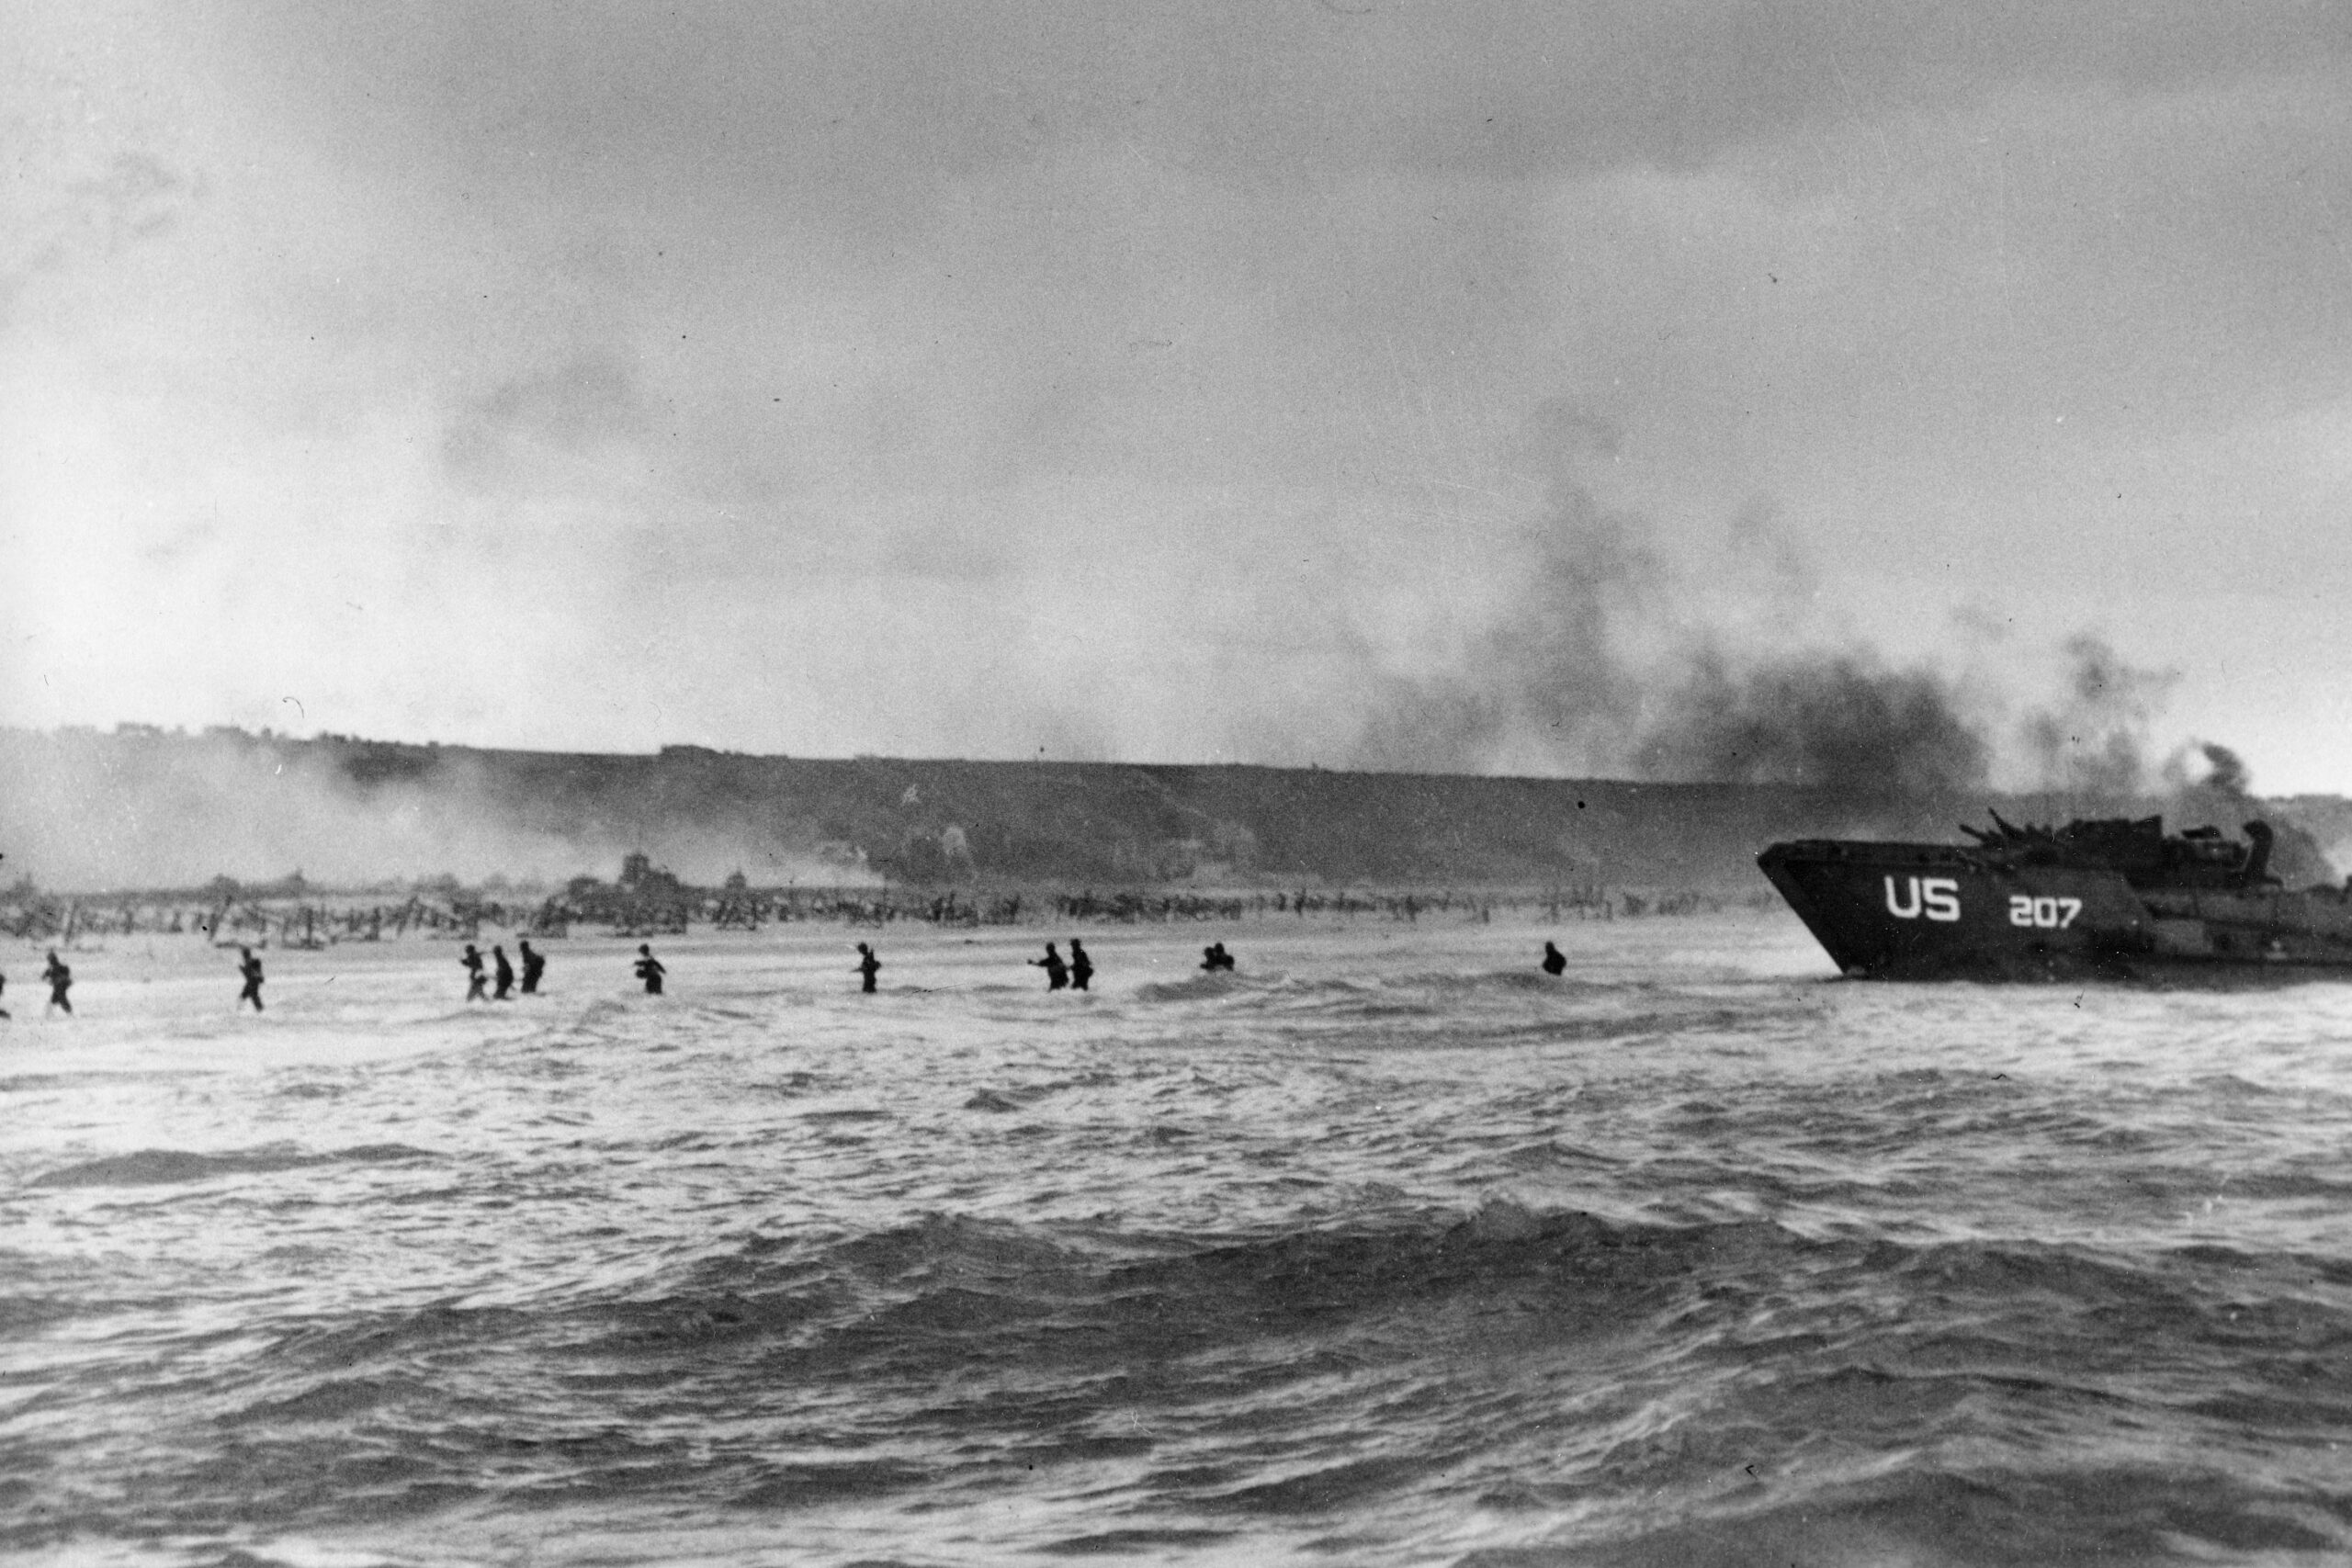 Under the cover of naval shell fire, American infantrymen wade ashore from their landing craft during the initial Normandy landing operations in France, June 6, 1944. More than 2,200 Allied aircraft begin bombing German defenses and other targets in Normandy. They are followed by 1,200 aircraft carrying more than 23,000 American, British and Canadian airborne troops. British forces landing in gliders take two strategic bridges near the city of Caen. (AP Photo/Peter Carroll, File)